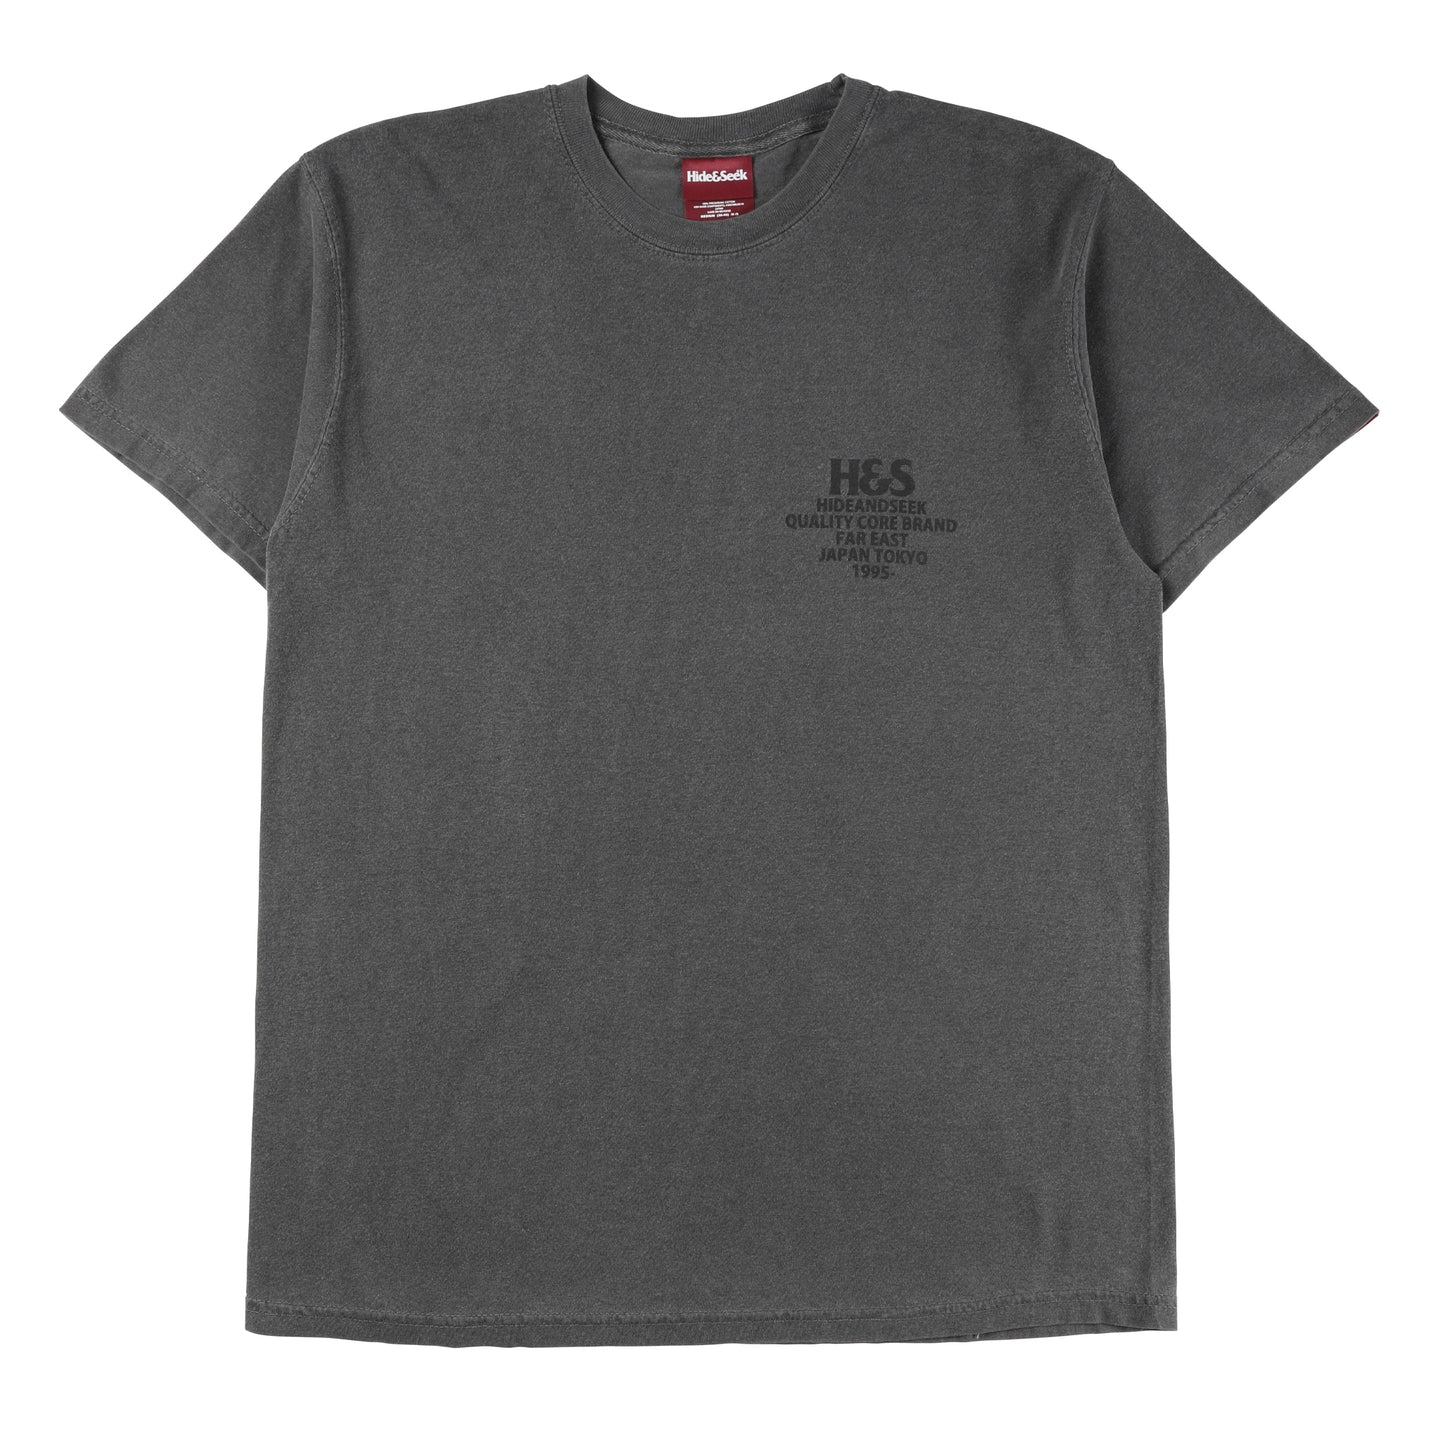 Hide and Seek H&S Logo Garment Dyed T-Shirt Charcoal Gray